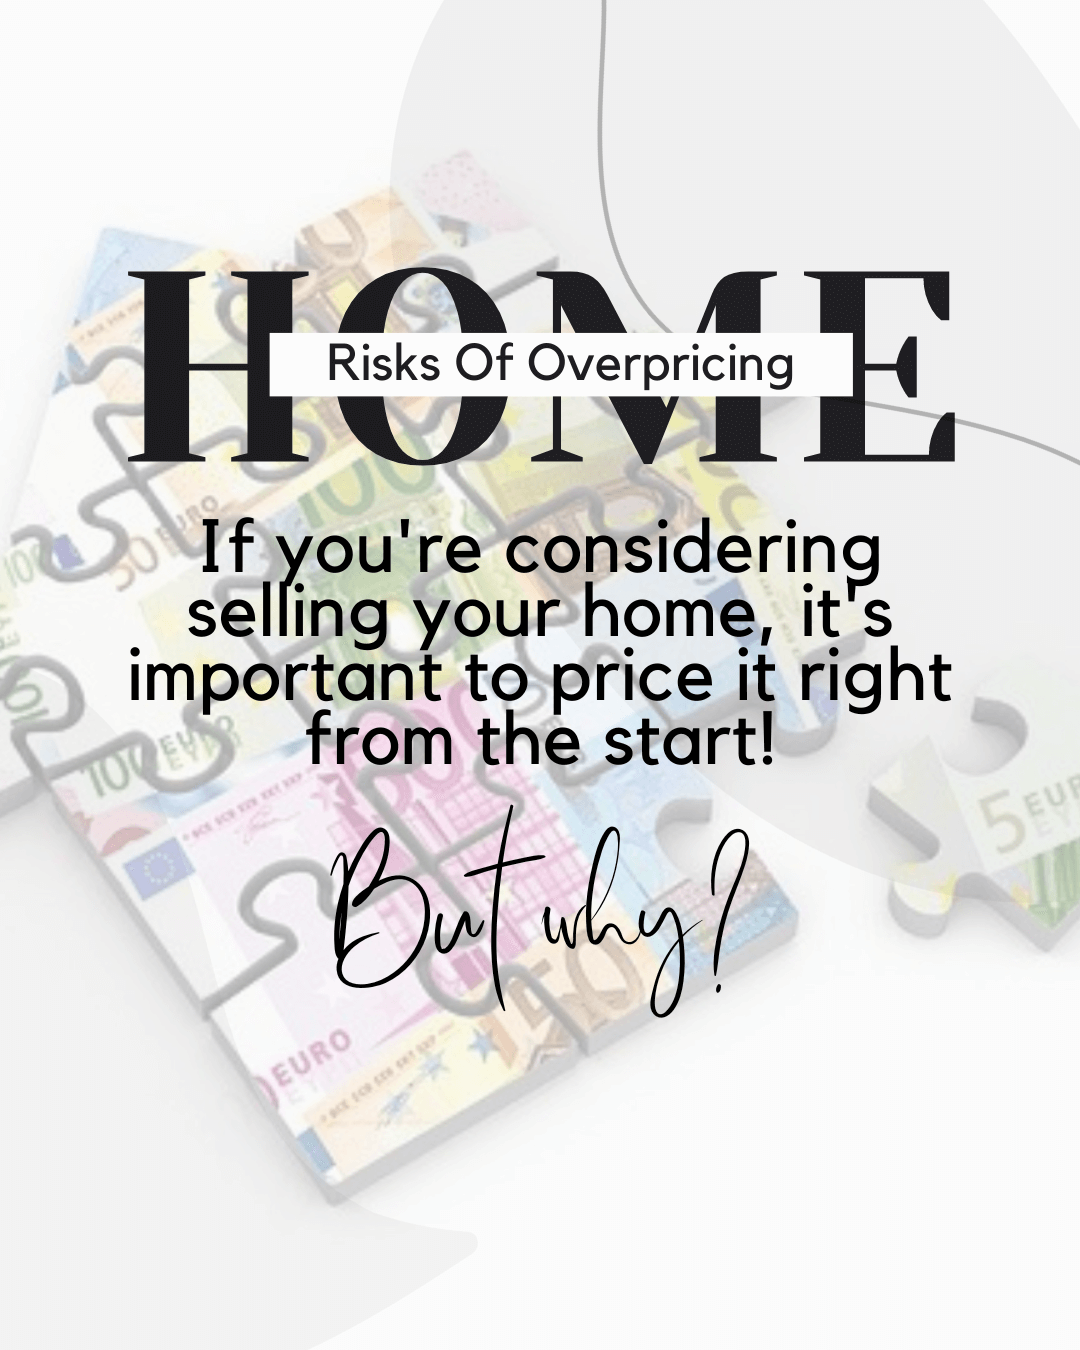 Oct. 7th – Risk of Overpricing Your Home